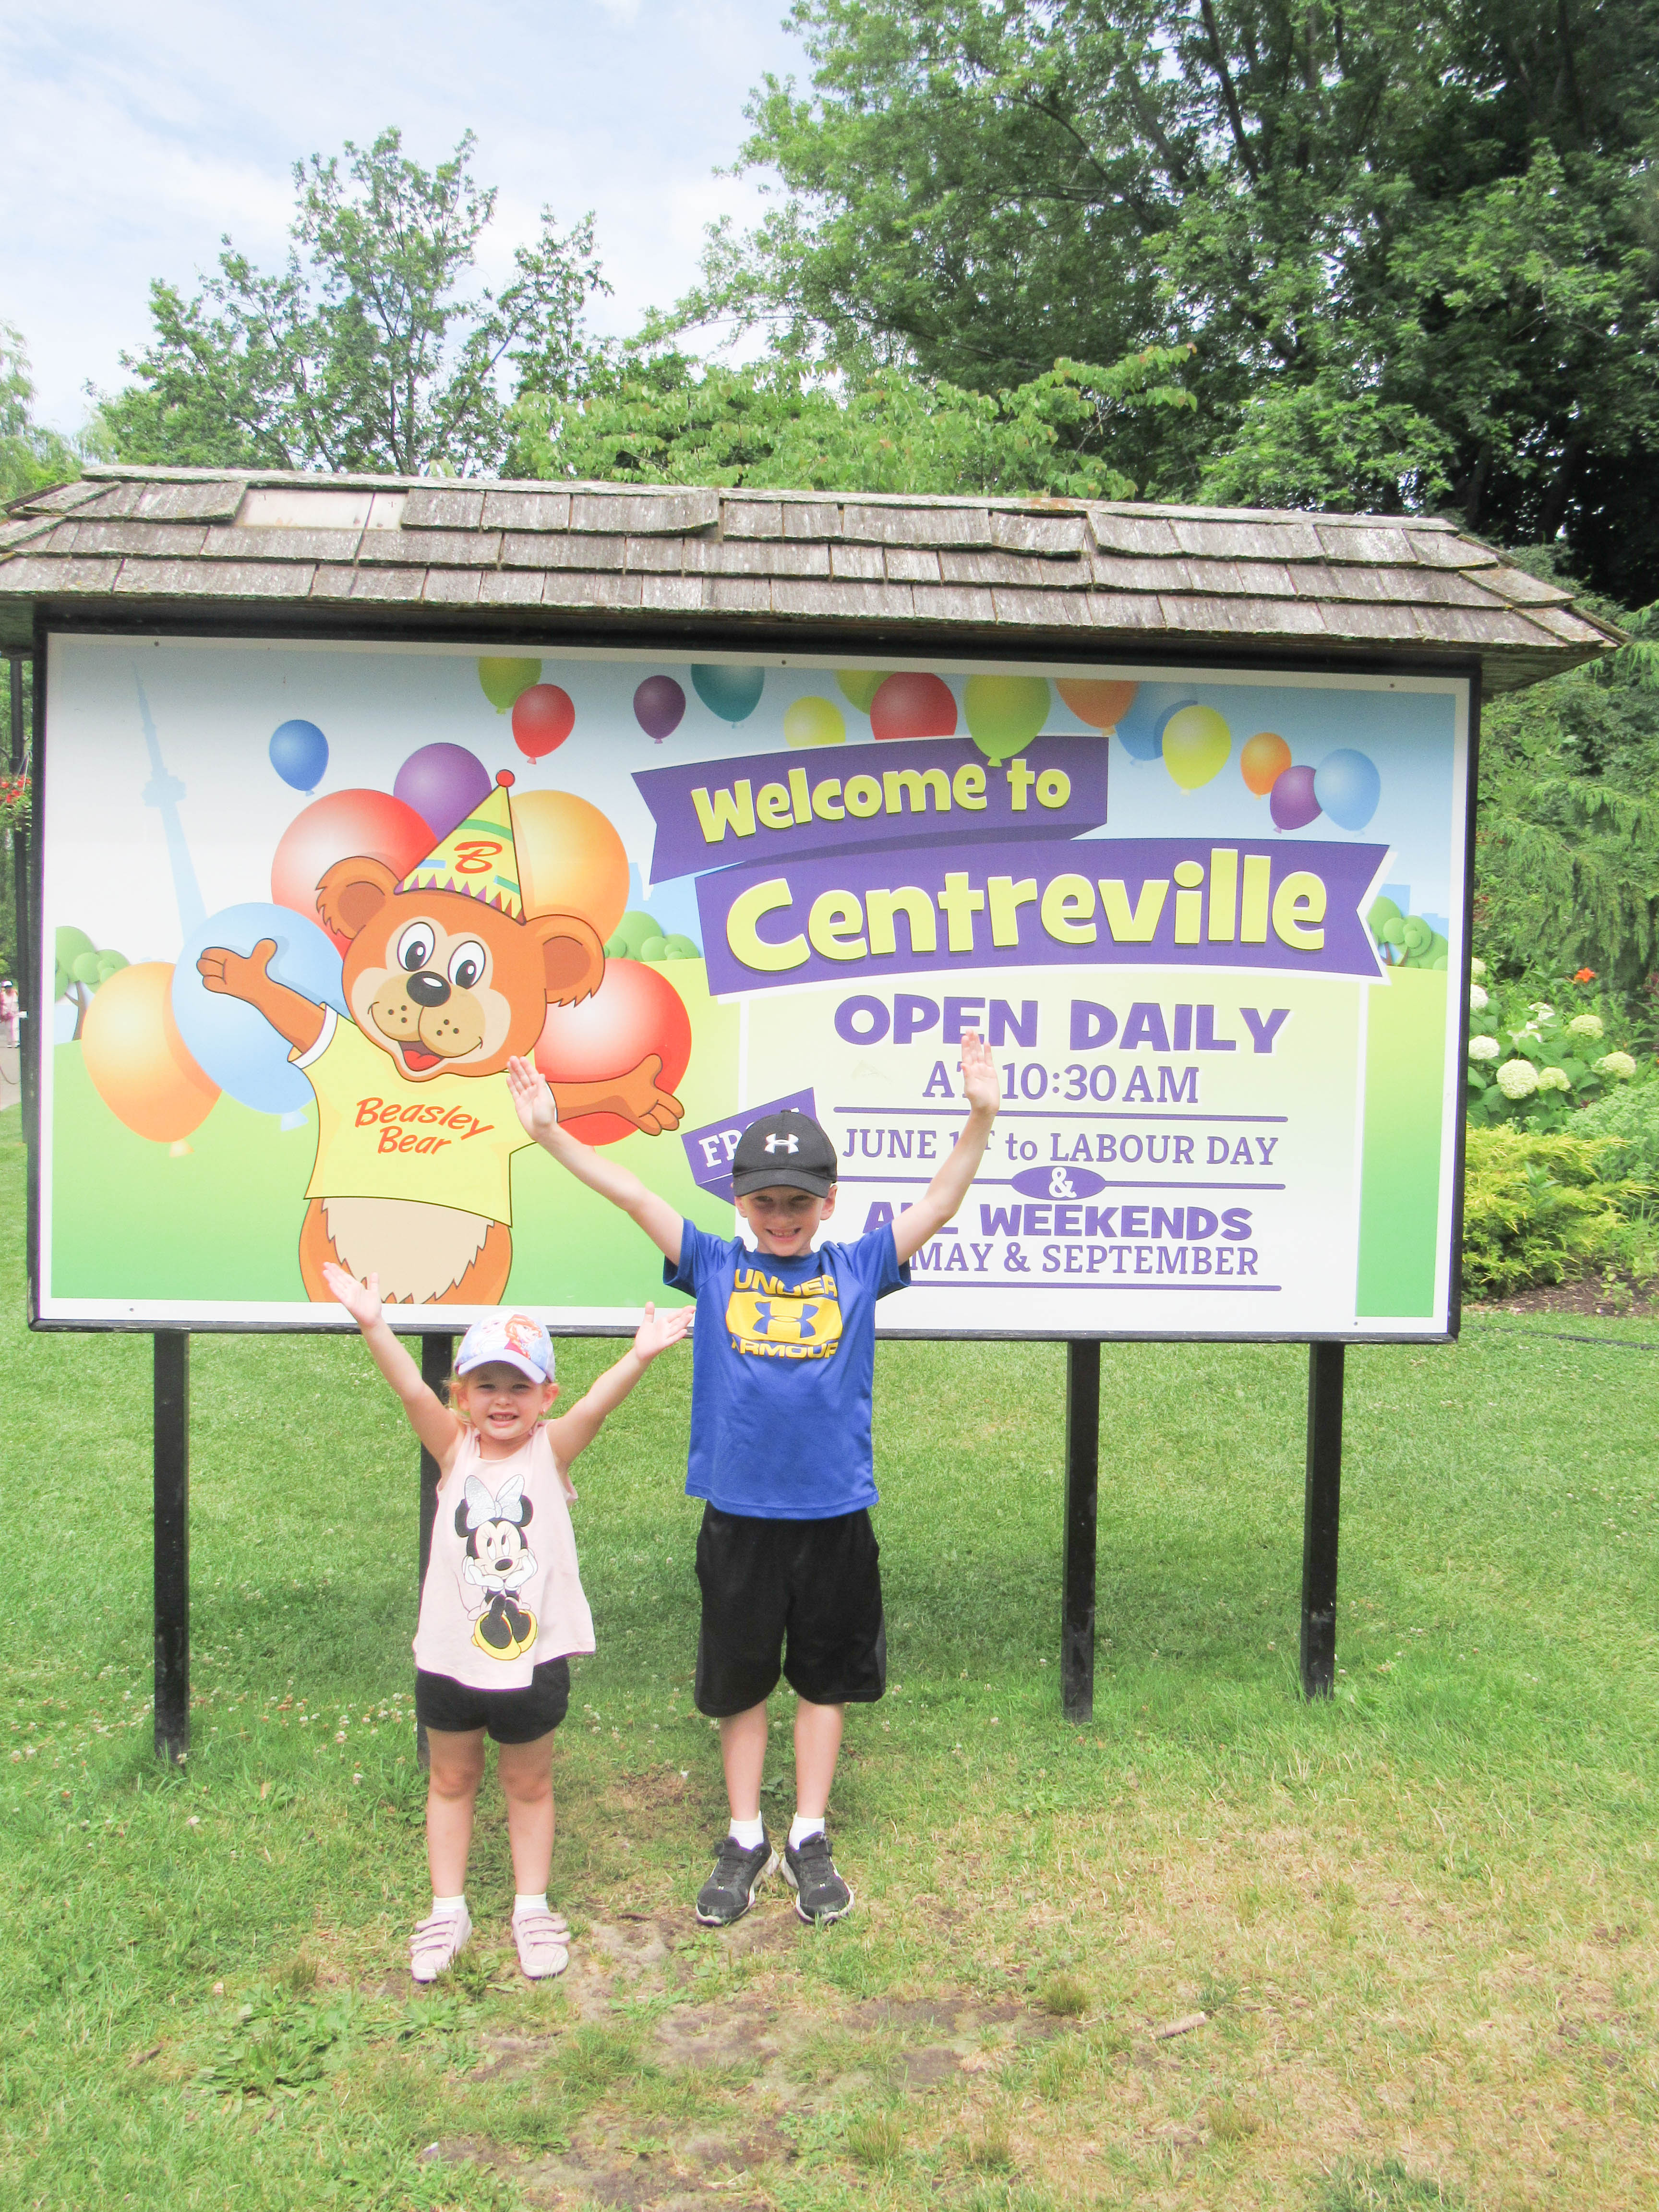 Our Visit to Centreville!